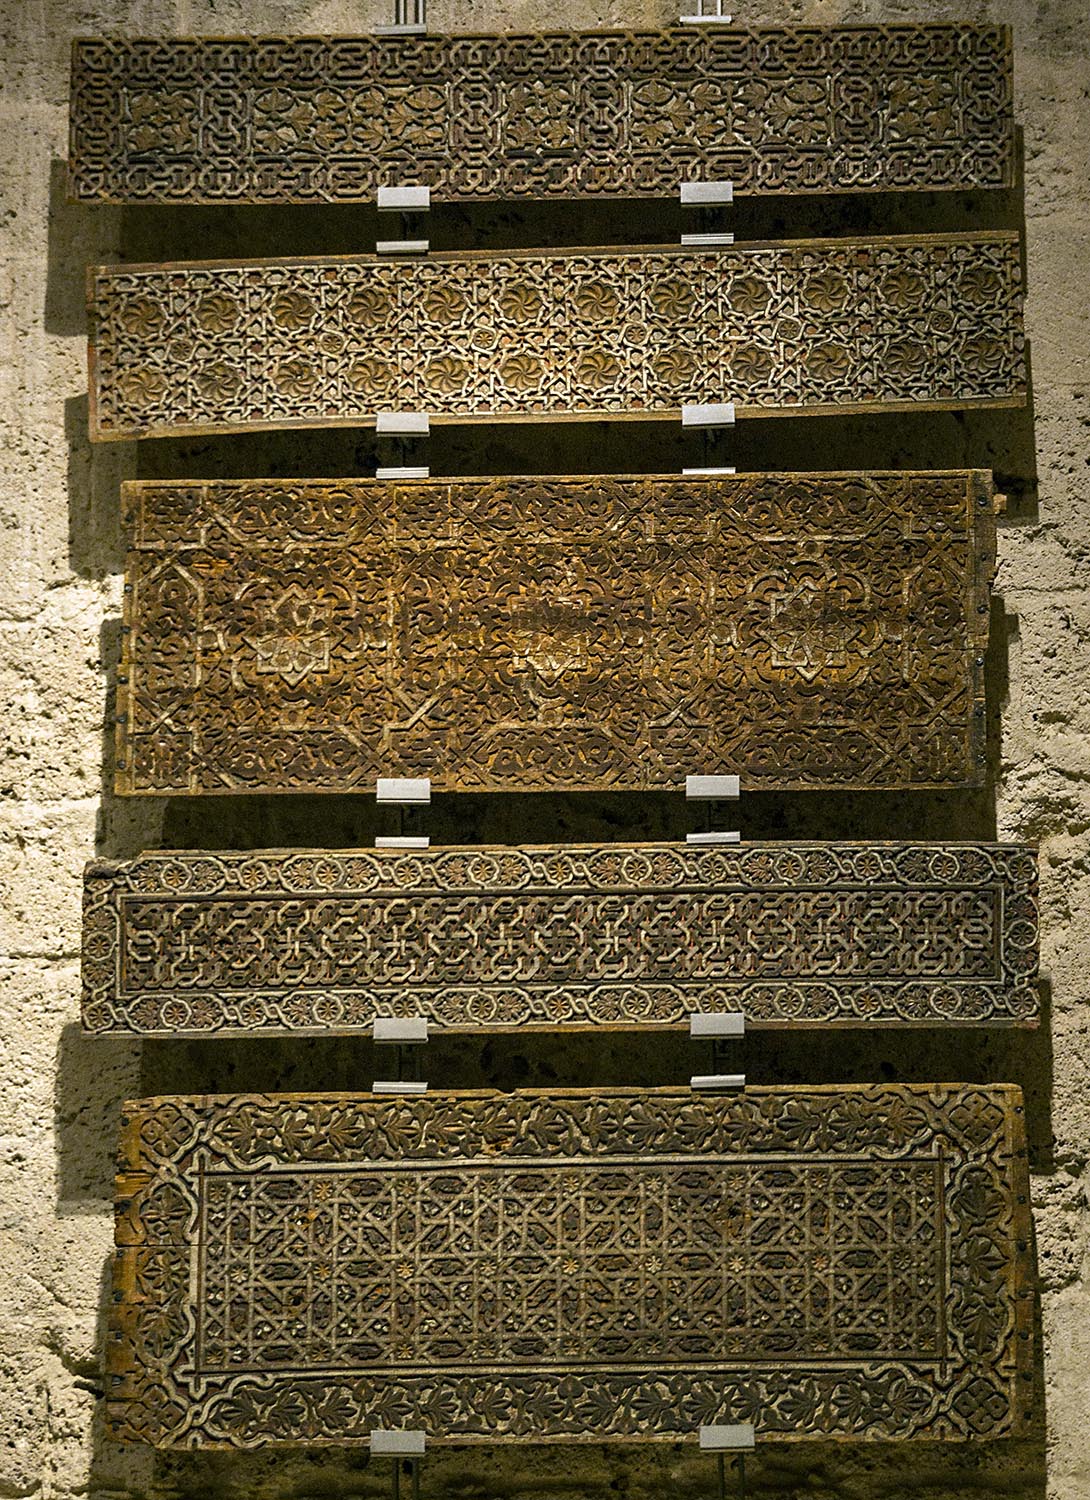 Patterned panels on display, Alhambra Museum